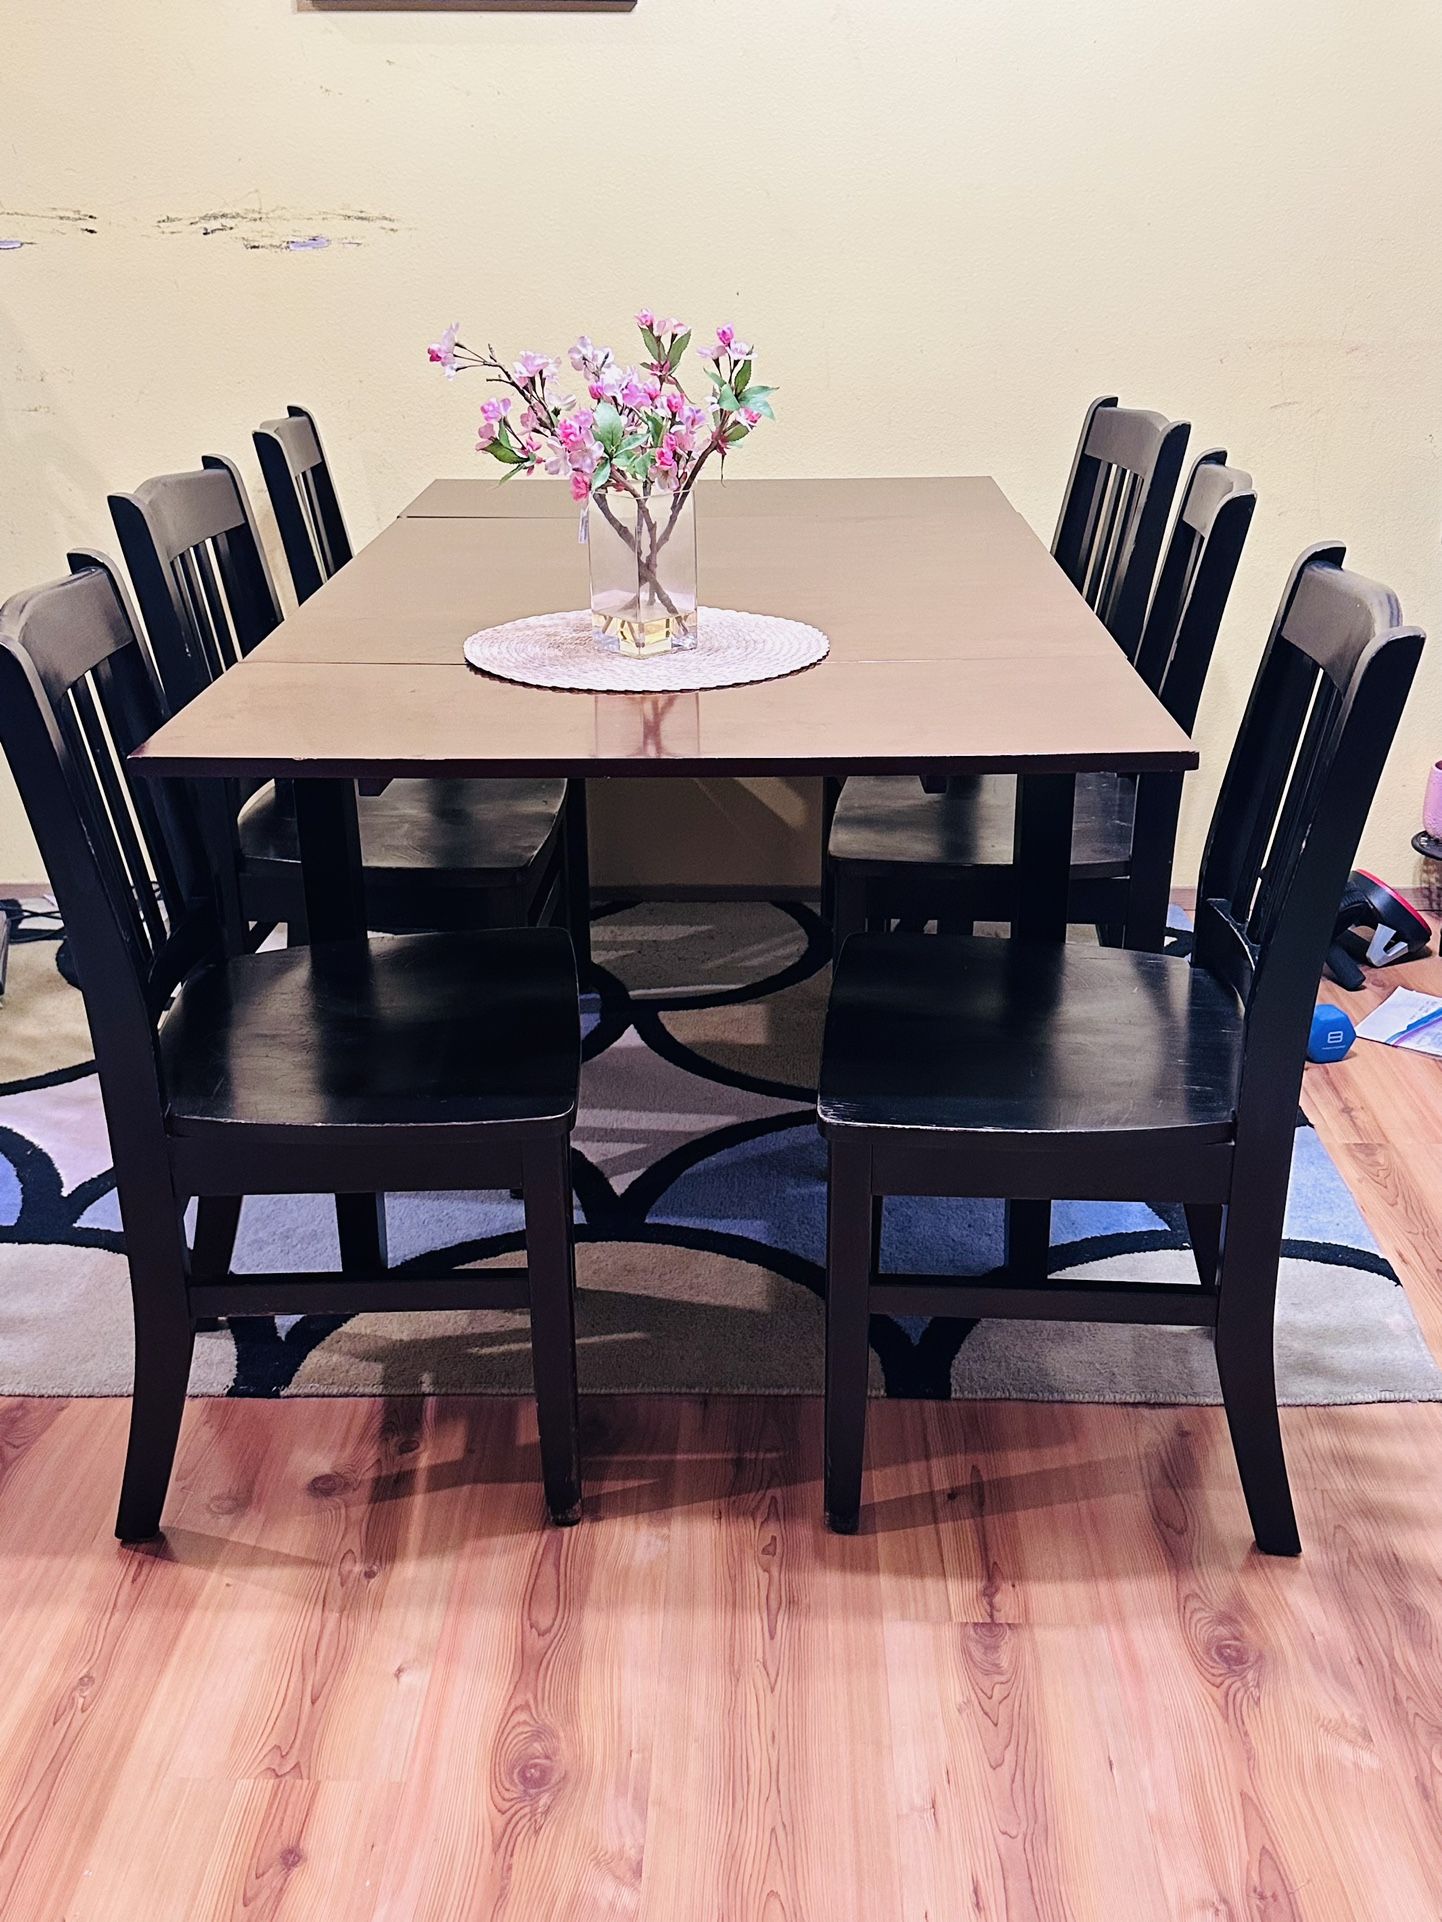 Dinning / Kitchen Table With 6 Black Chairs Very Good Condition $219❤️😍👍🎈